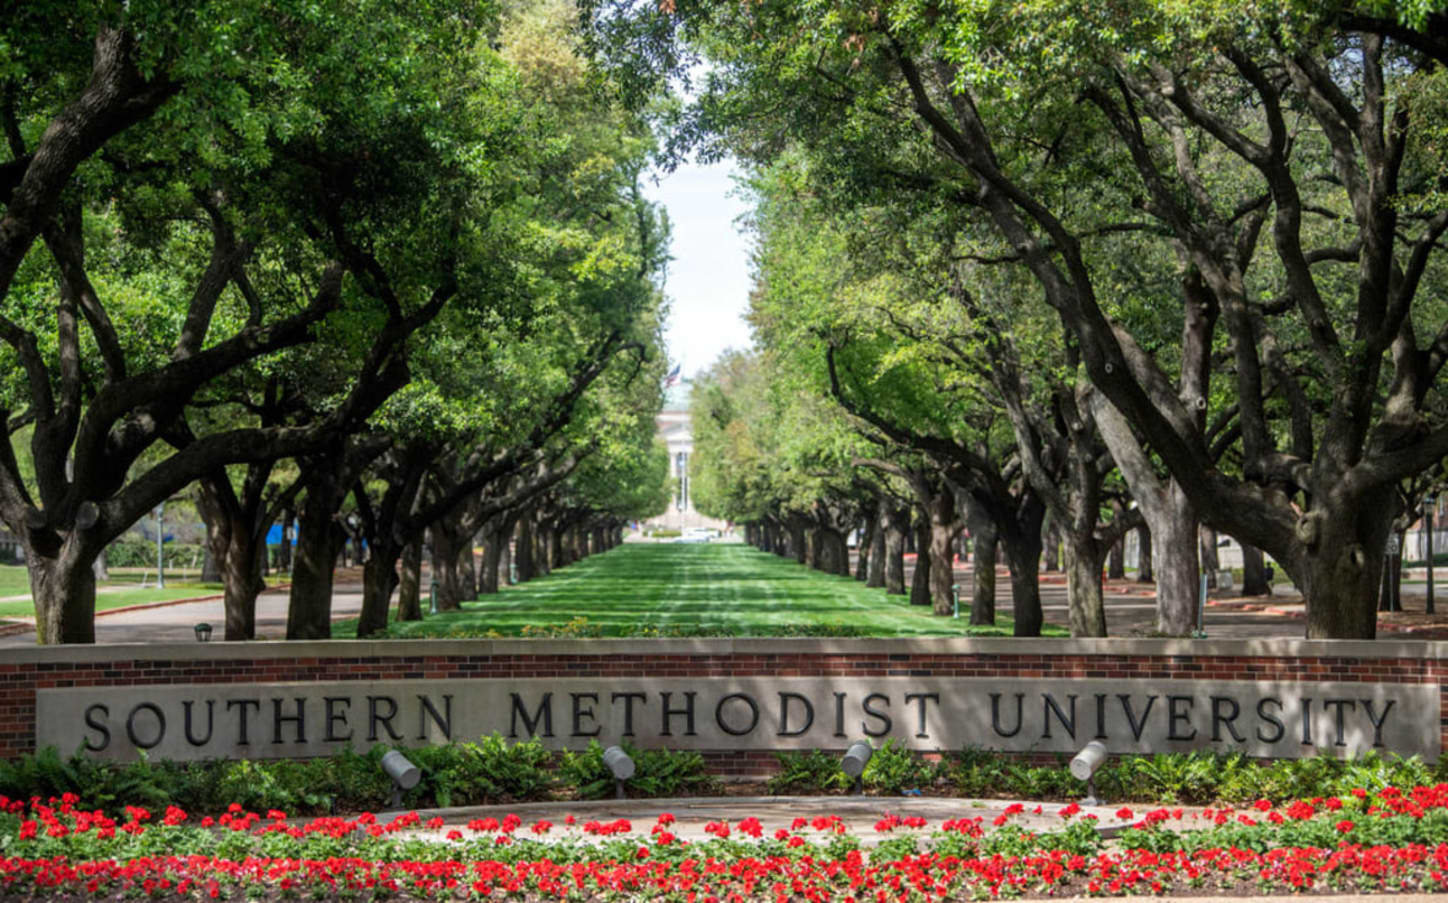 Southern Methodist University - Moody School of Graduate and Advanced Studies PhD in Molecular and Cellular Biology